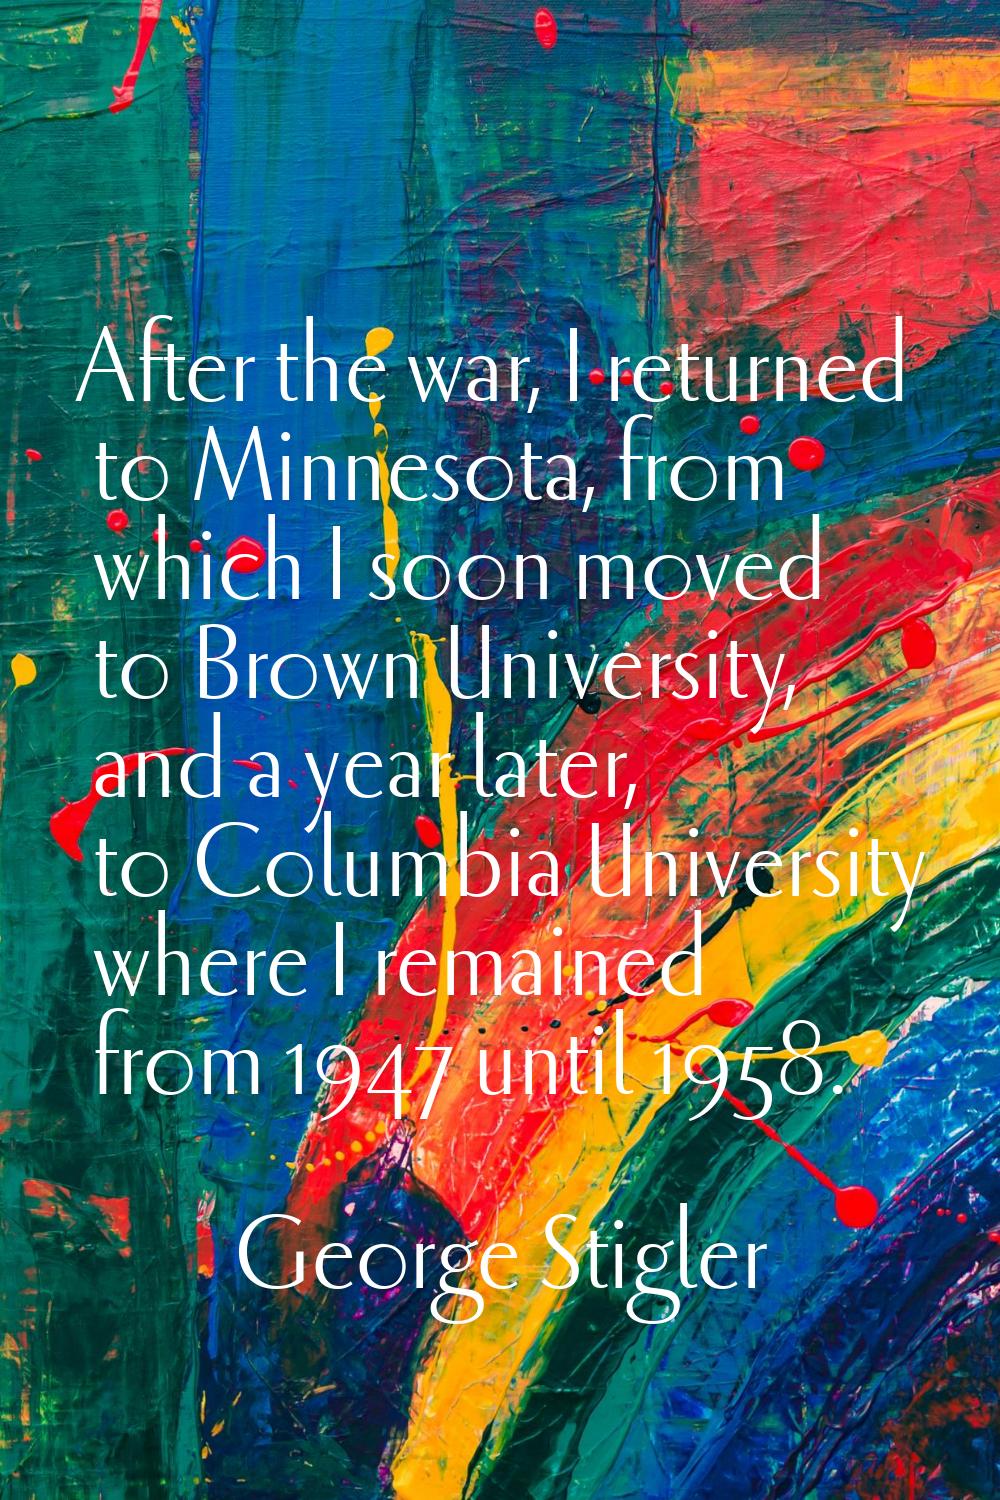 After the war, I returned to Minnesota, from which I soon moved to Brown University, and a year lat